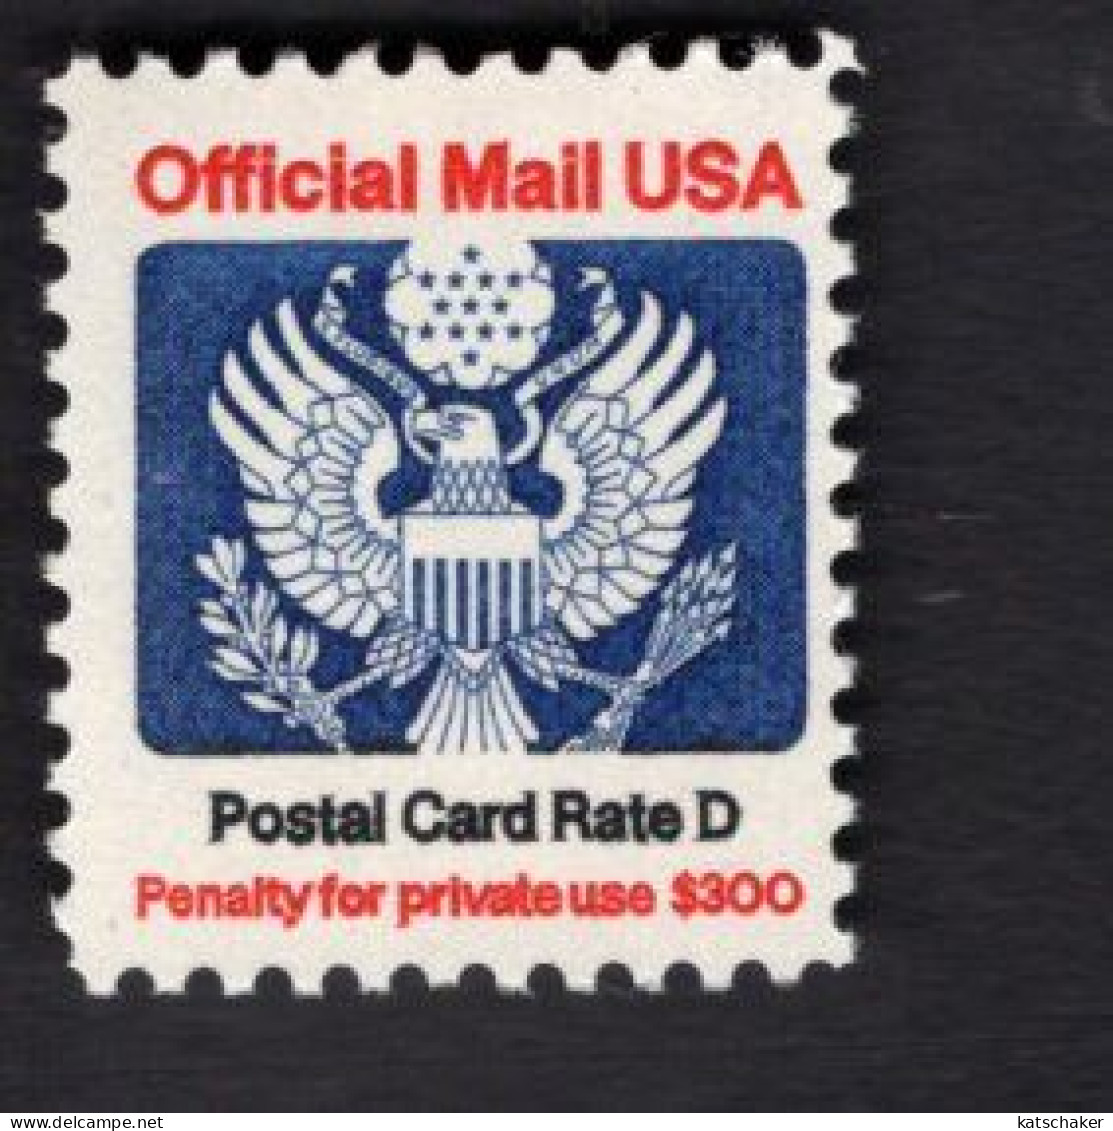 2008963964 1985 (XX) SCOTT O138 POSTFRIS MINT NEVER HINGED Eagle And Shield OFFICIAL MAIL -  POSTAL CARD RATE D - Dienstzegels